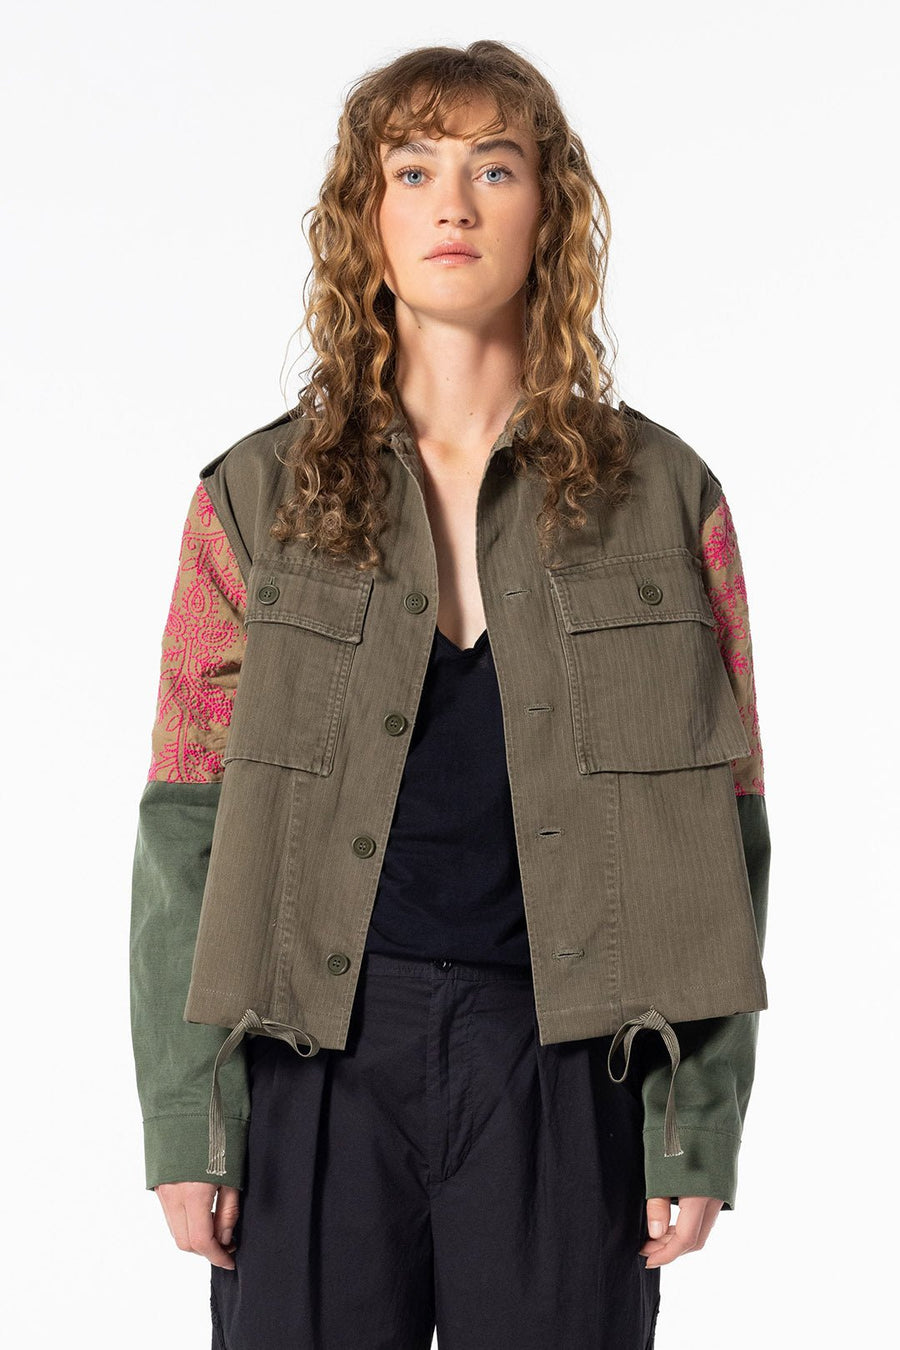 LOVE NOT WAR EMBROIDERED FLORAL JACKET, ARMY - Burning Torch Online Boutique